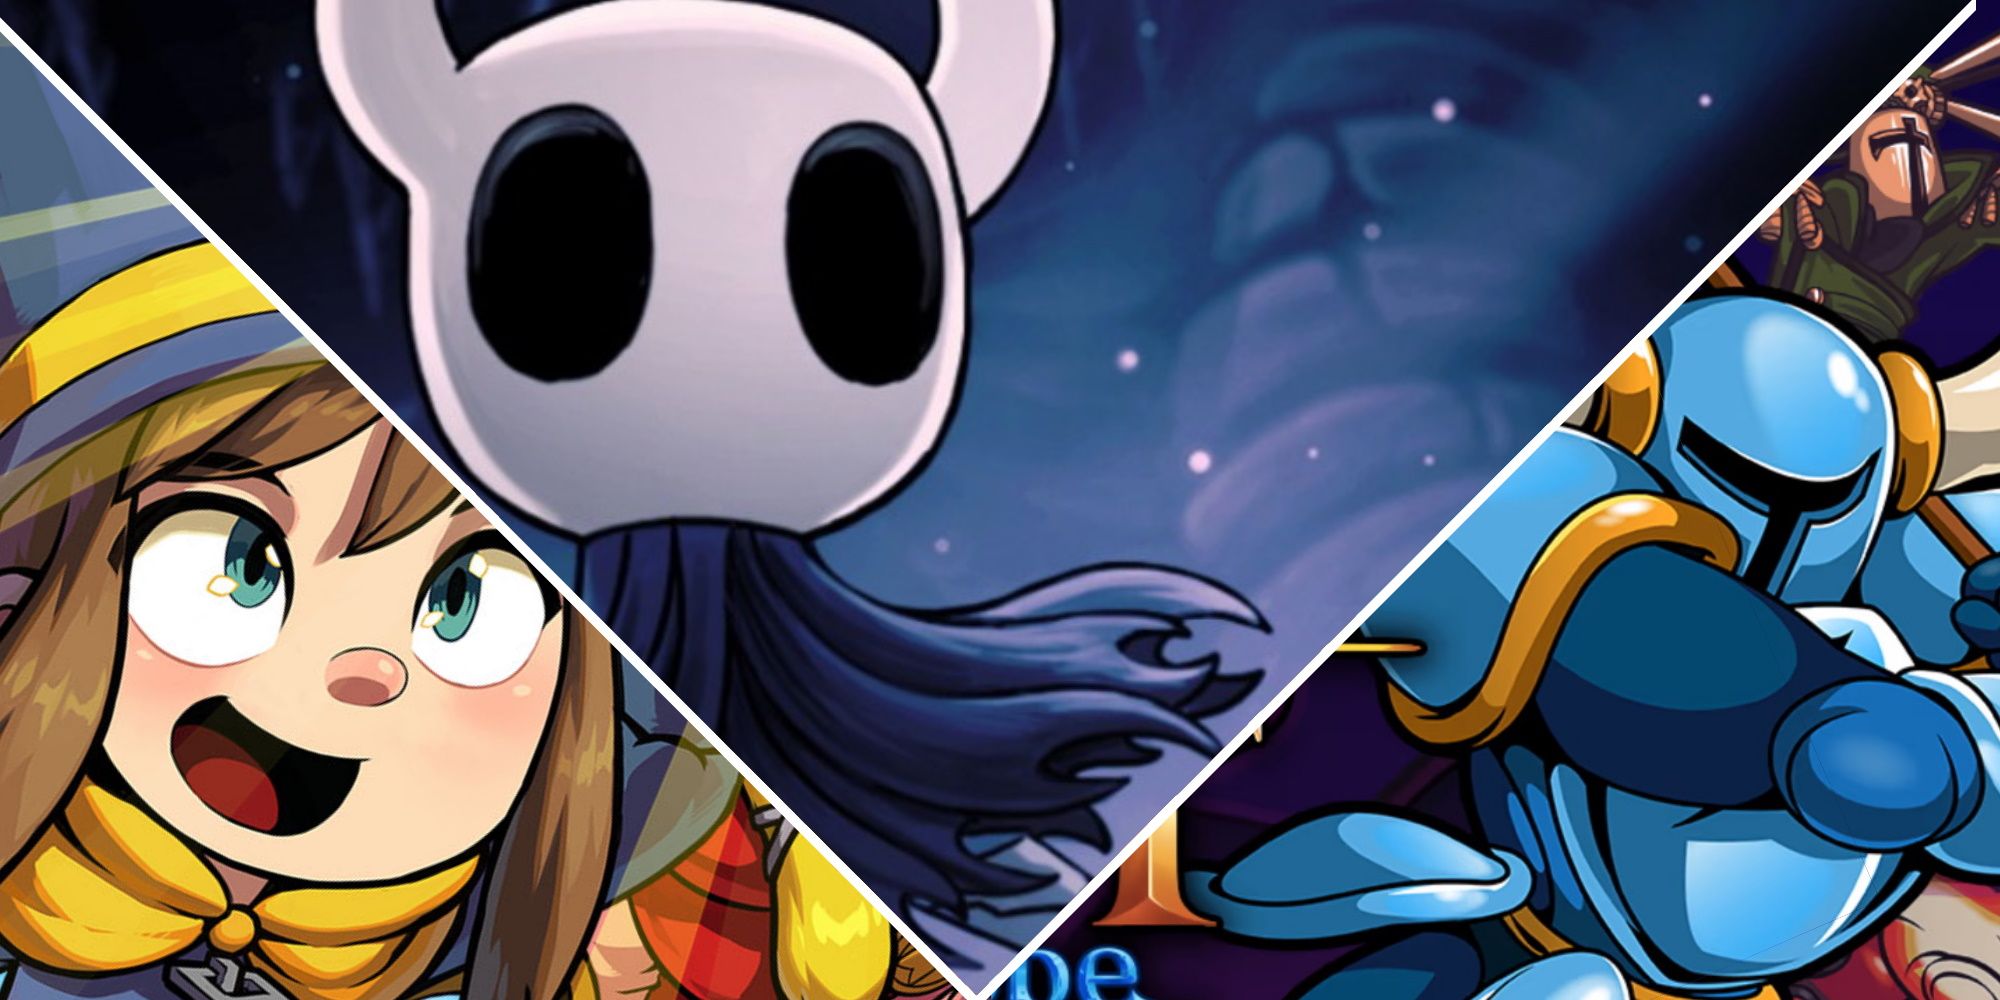 Hat in Time, Hollow Knight, Shovel Knight